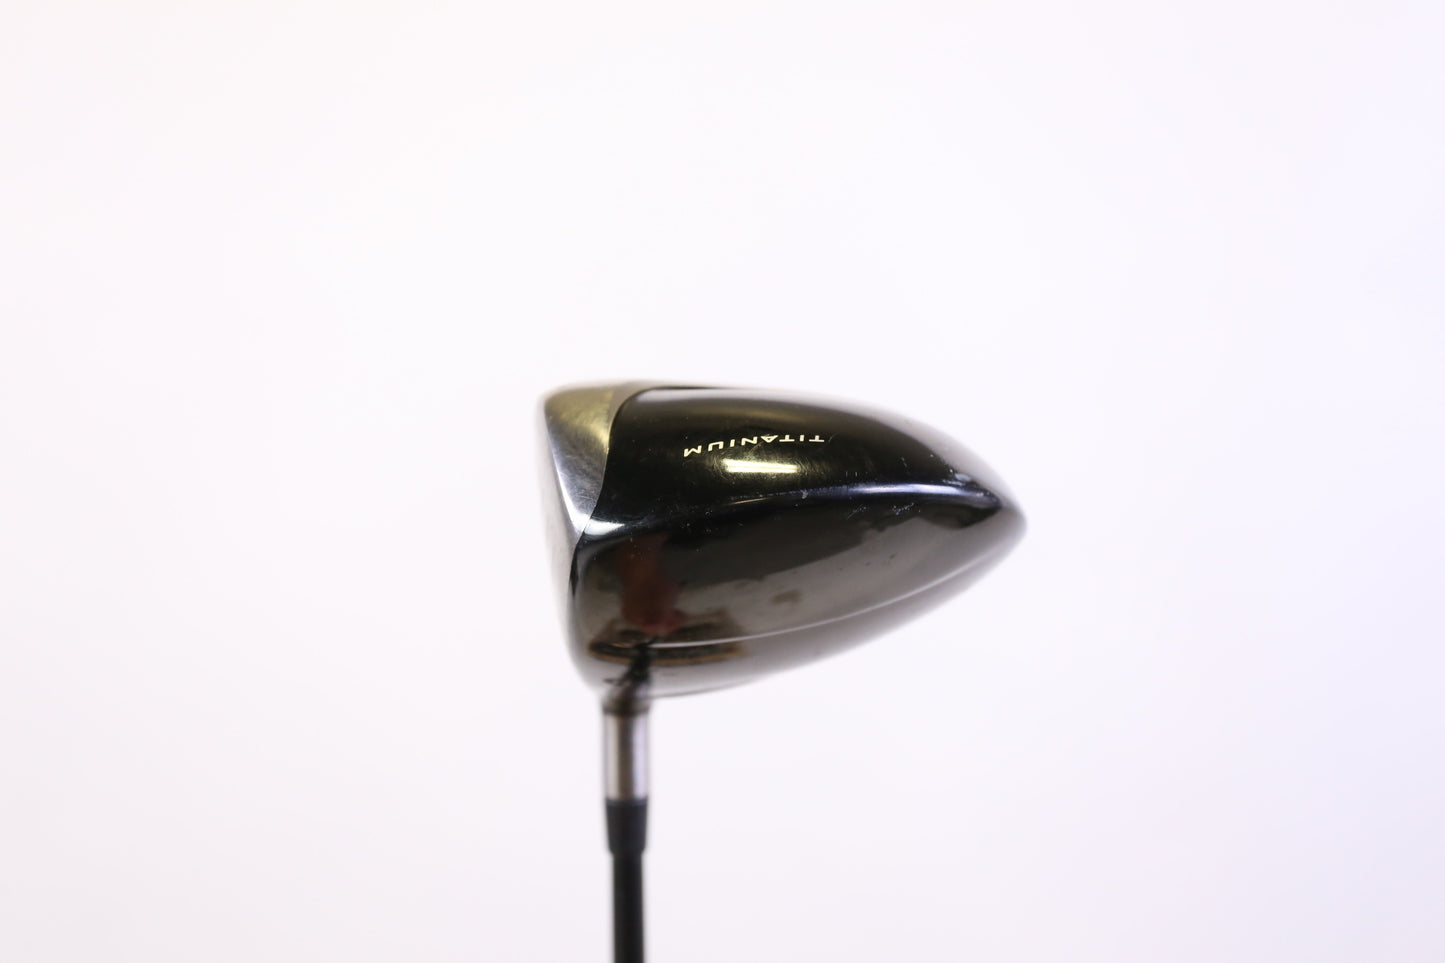 Used TaylorMade R580 Driver - Right-Handed - 9.5 Degrees - Regular Flex